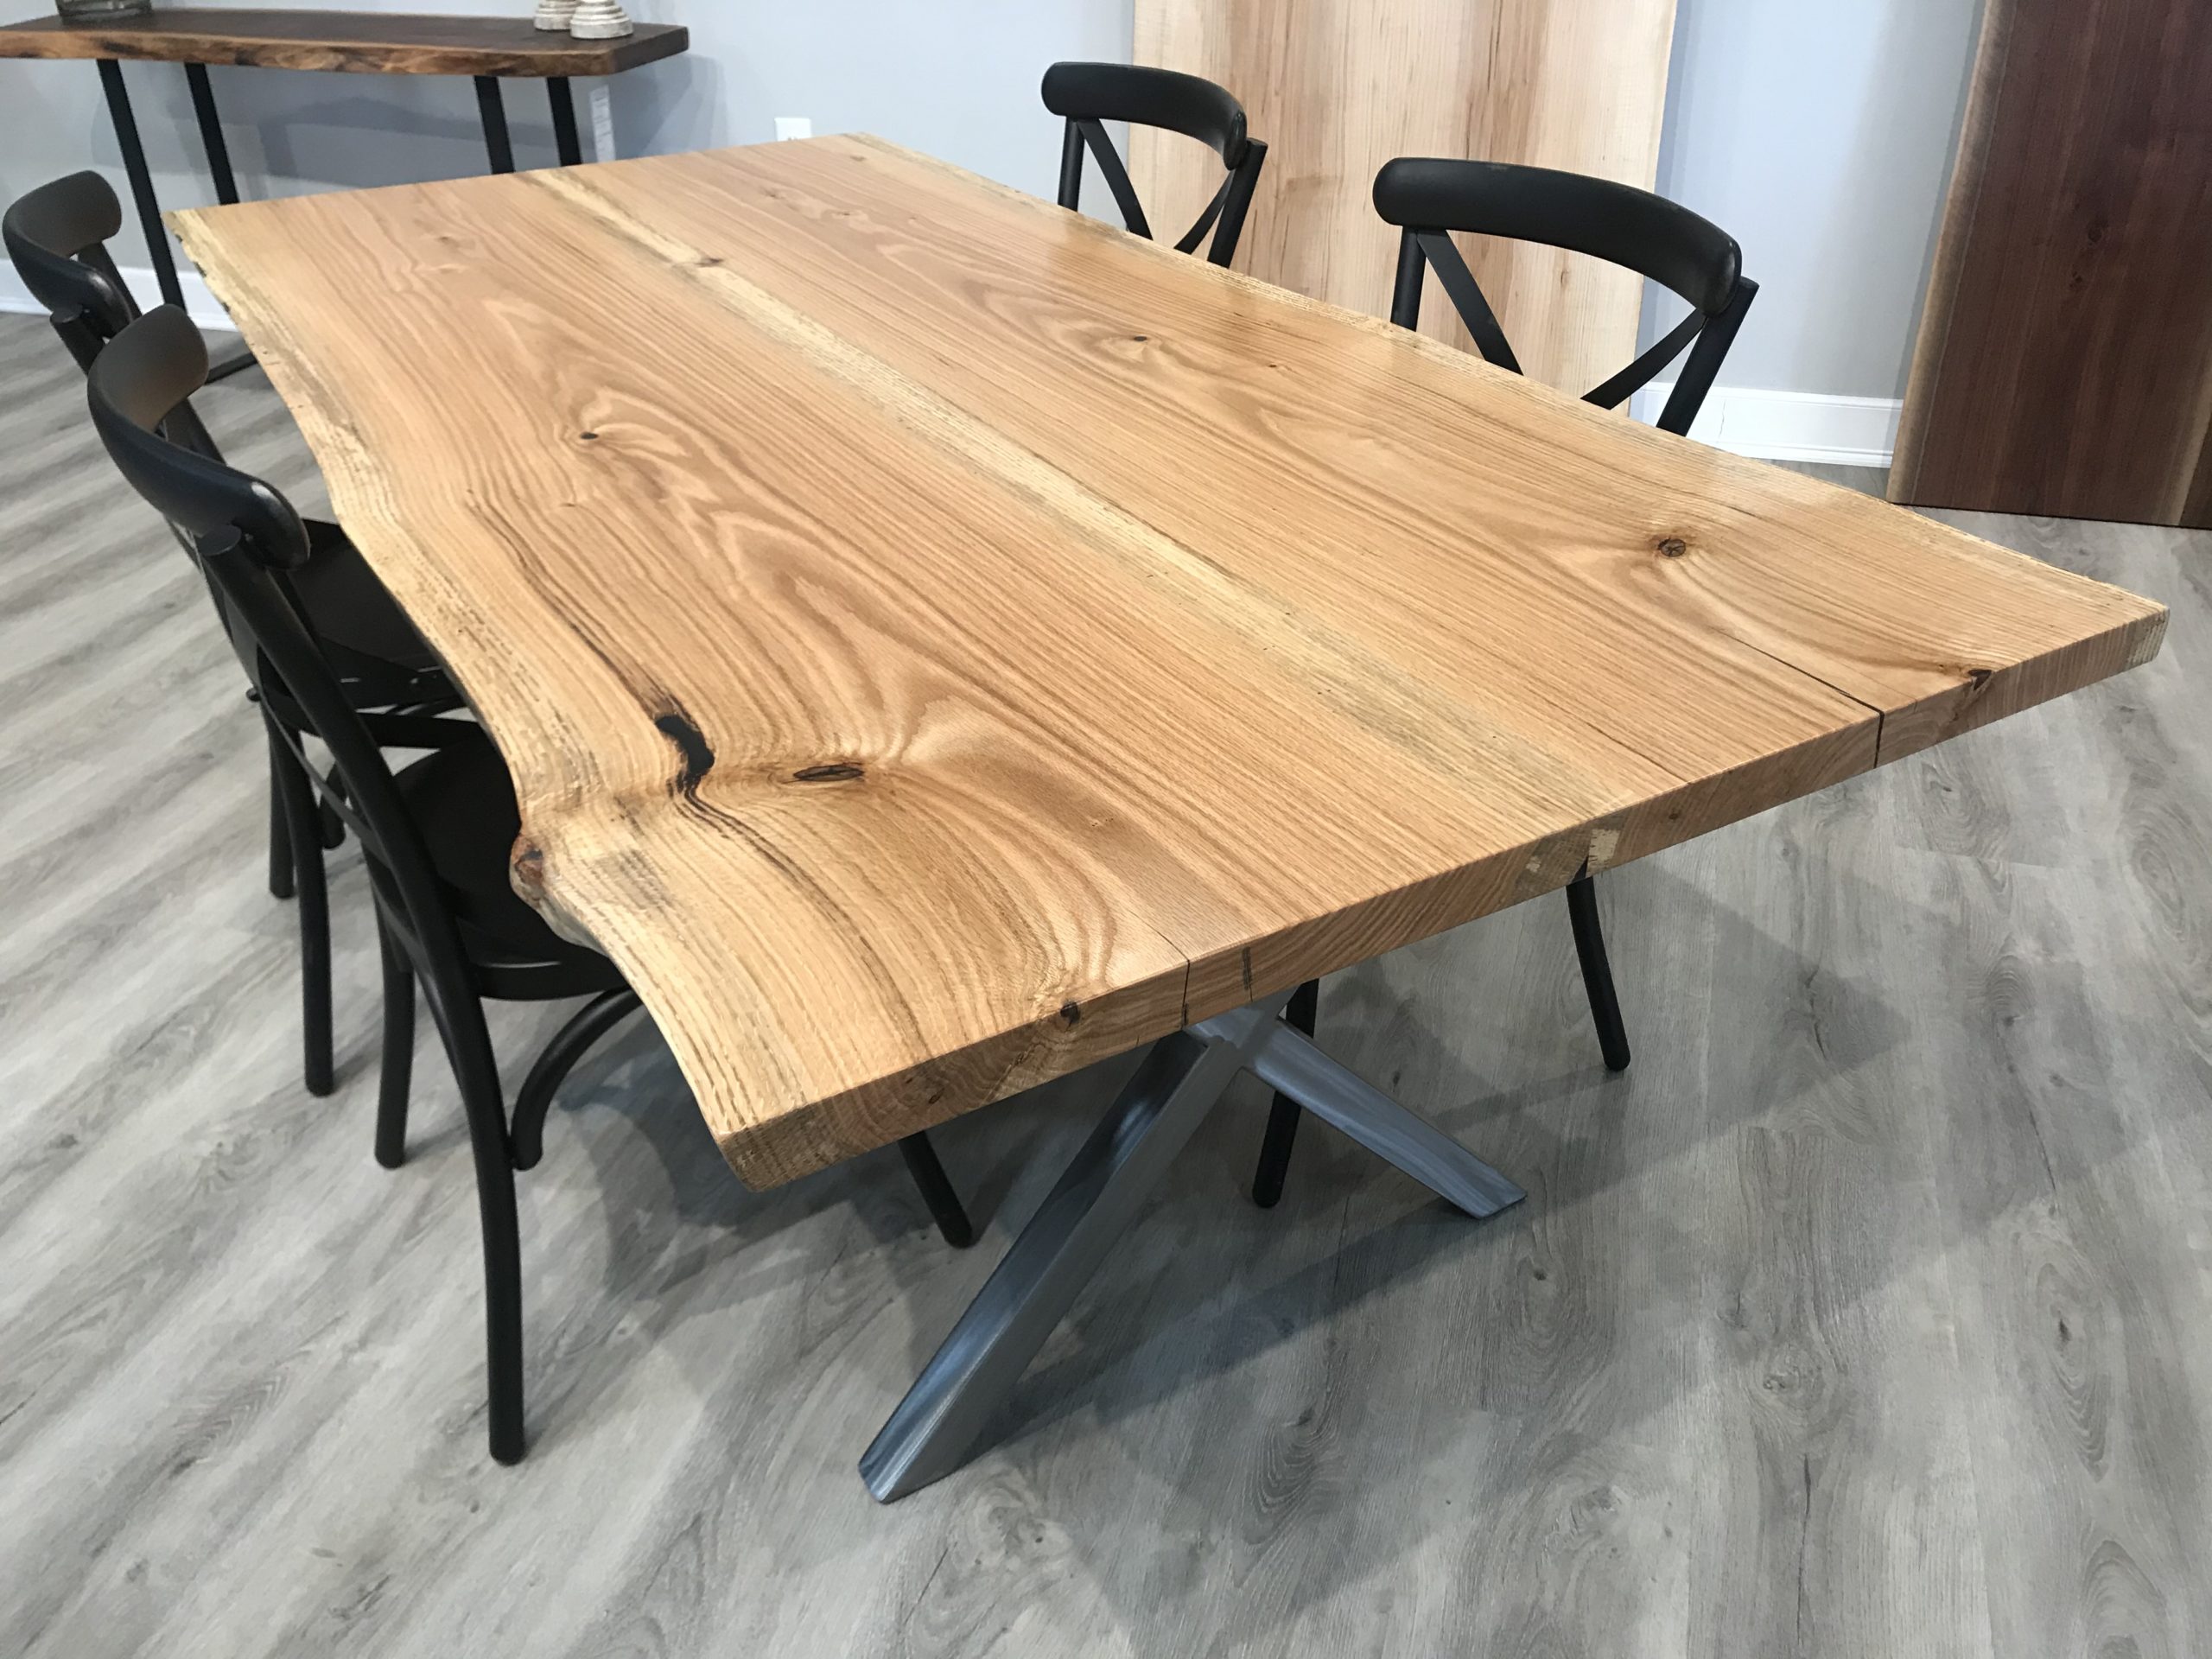 Red Oak Dining Room Table Chairs